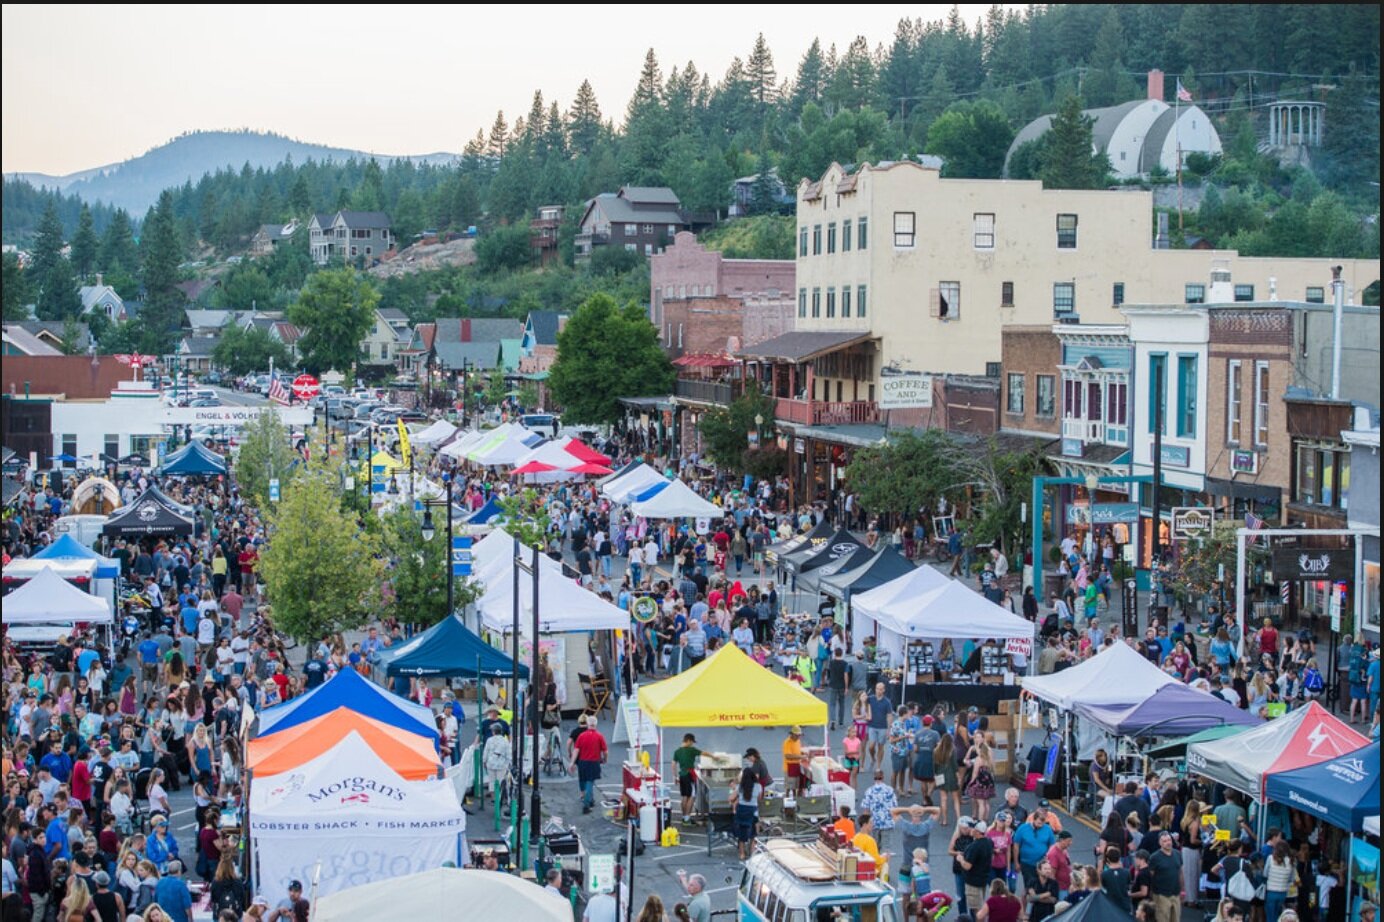 Truckee Thursday in Downtown Truckee on August 12th, 2021